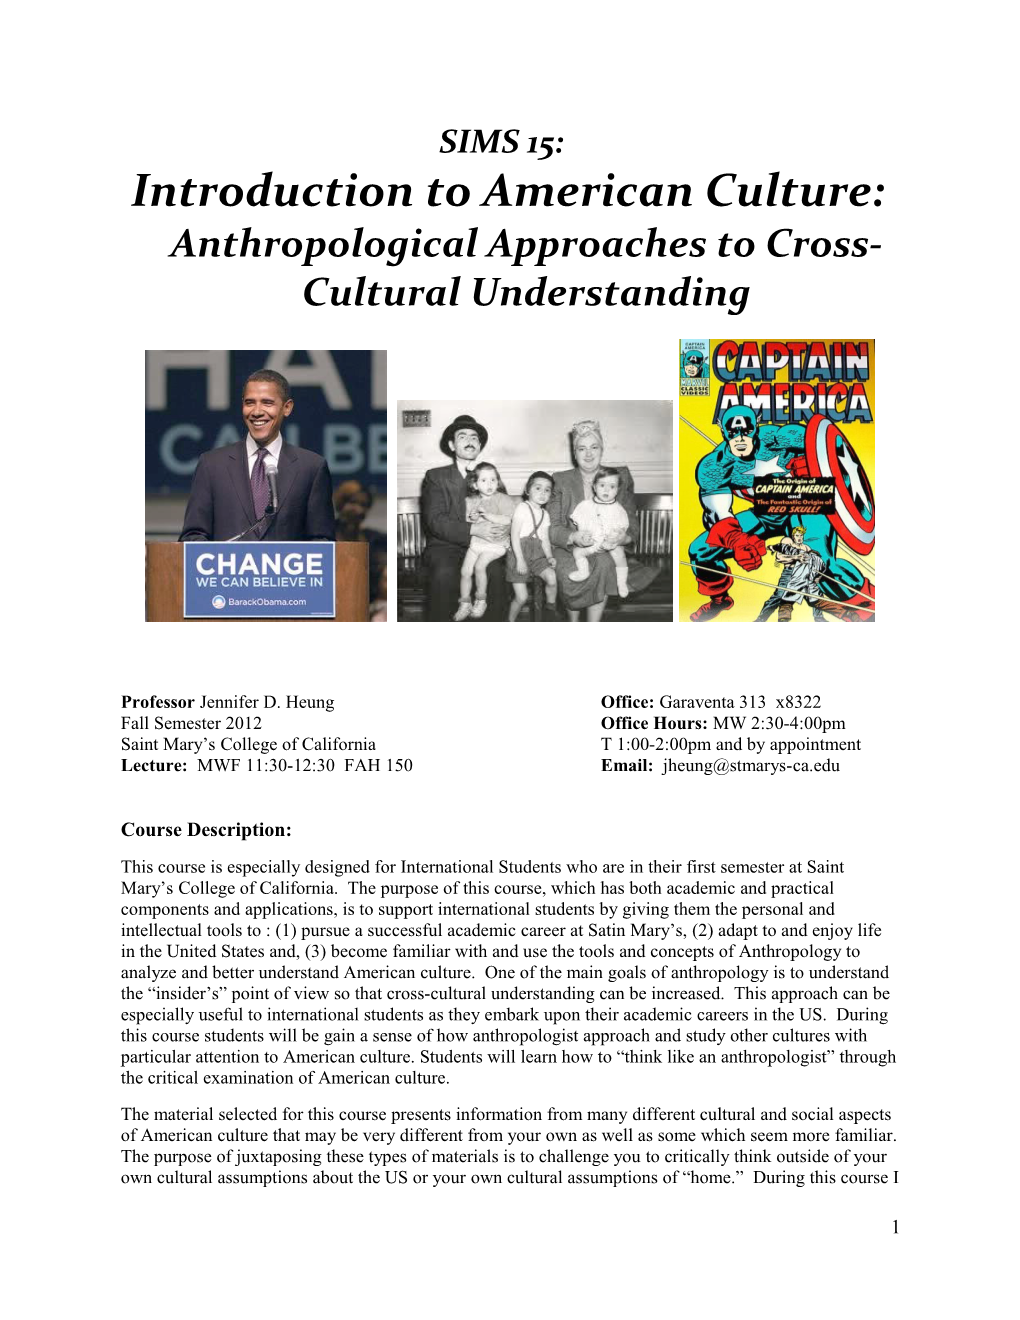 Introduction to American Culture: Anthropological Approaches to Cross-Cultural Understanding